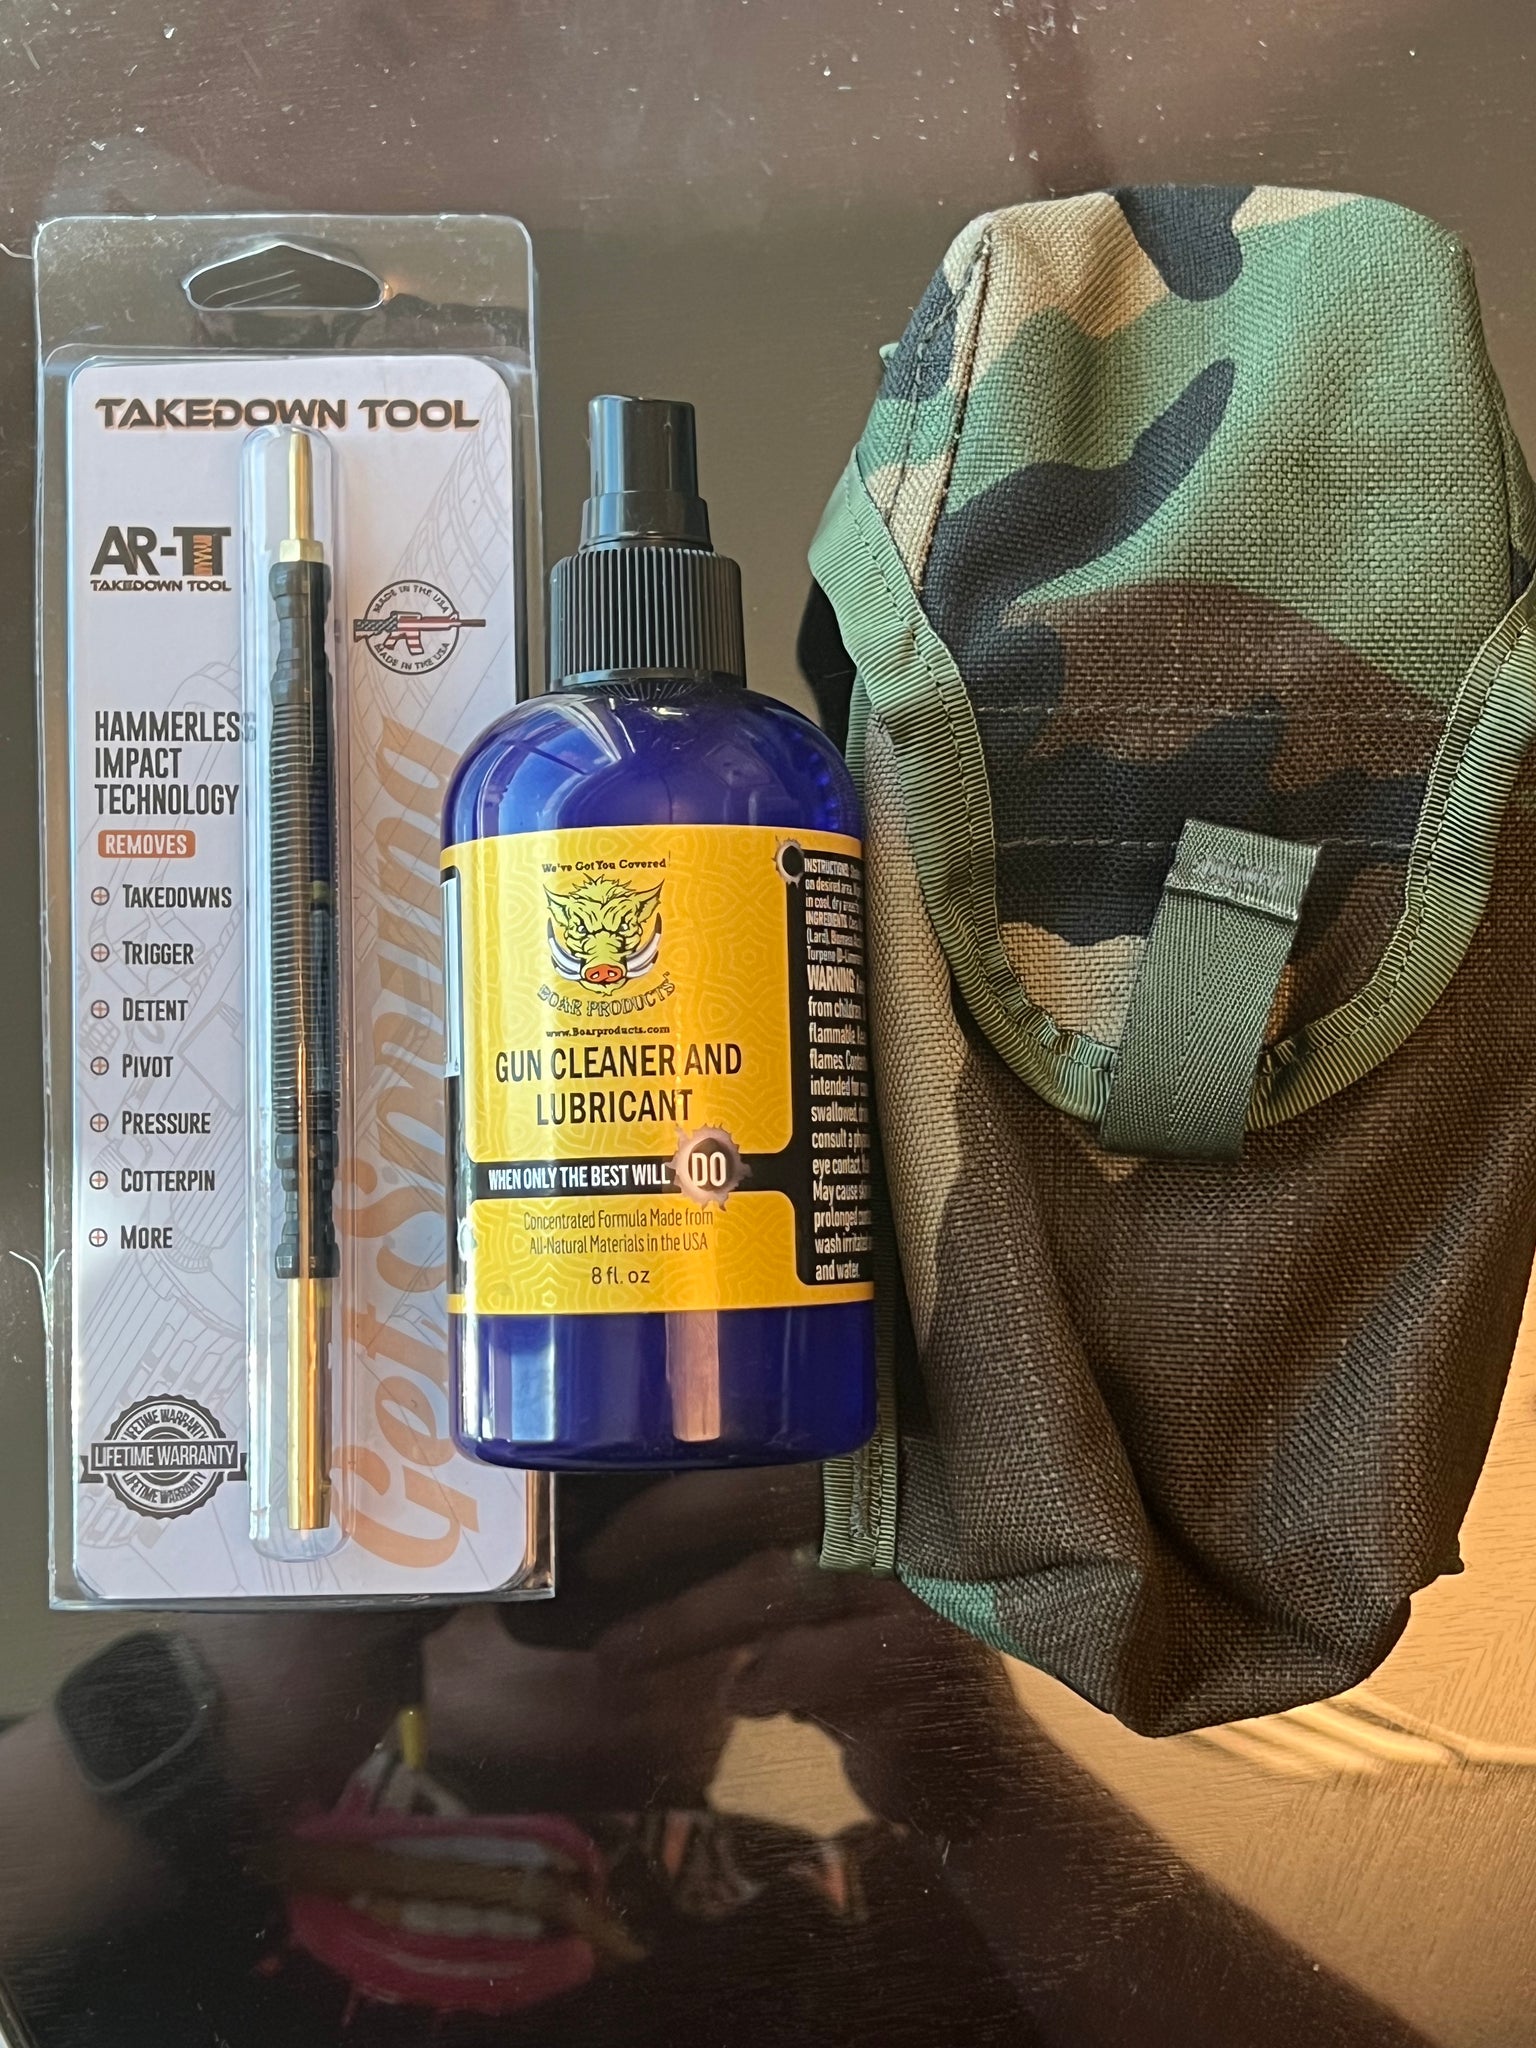 The Full cleaning solution for your AR, with The AR-Takedown Tool, Boar Products cleaner & Lubricant in US Mil Spec Mille pouch - AR TakeDown Tool